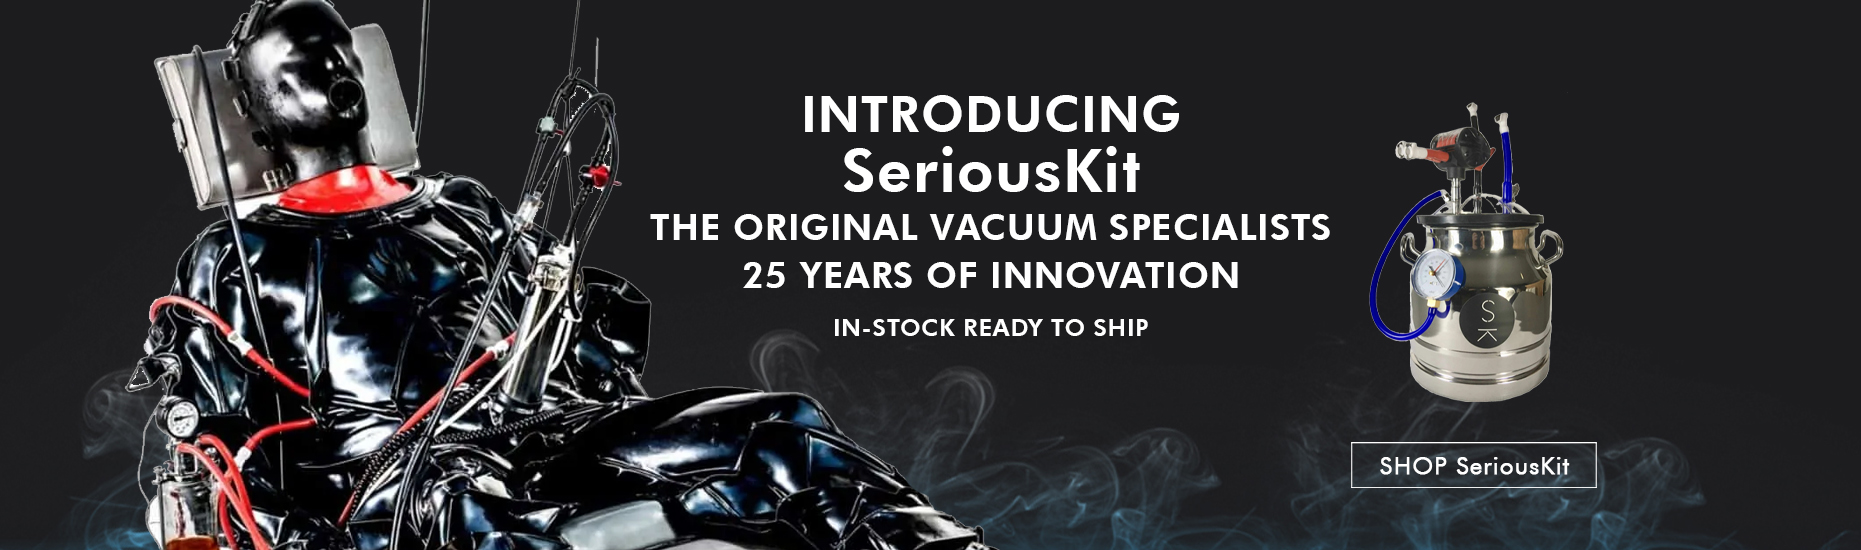 Introducing SeriousKit - The Original Vacuum Specialist - 25 Years of Innovation